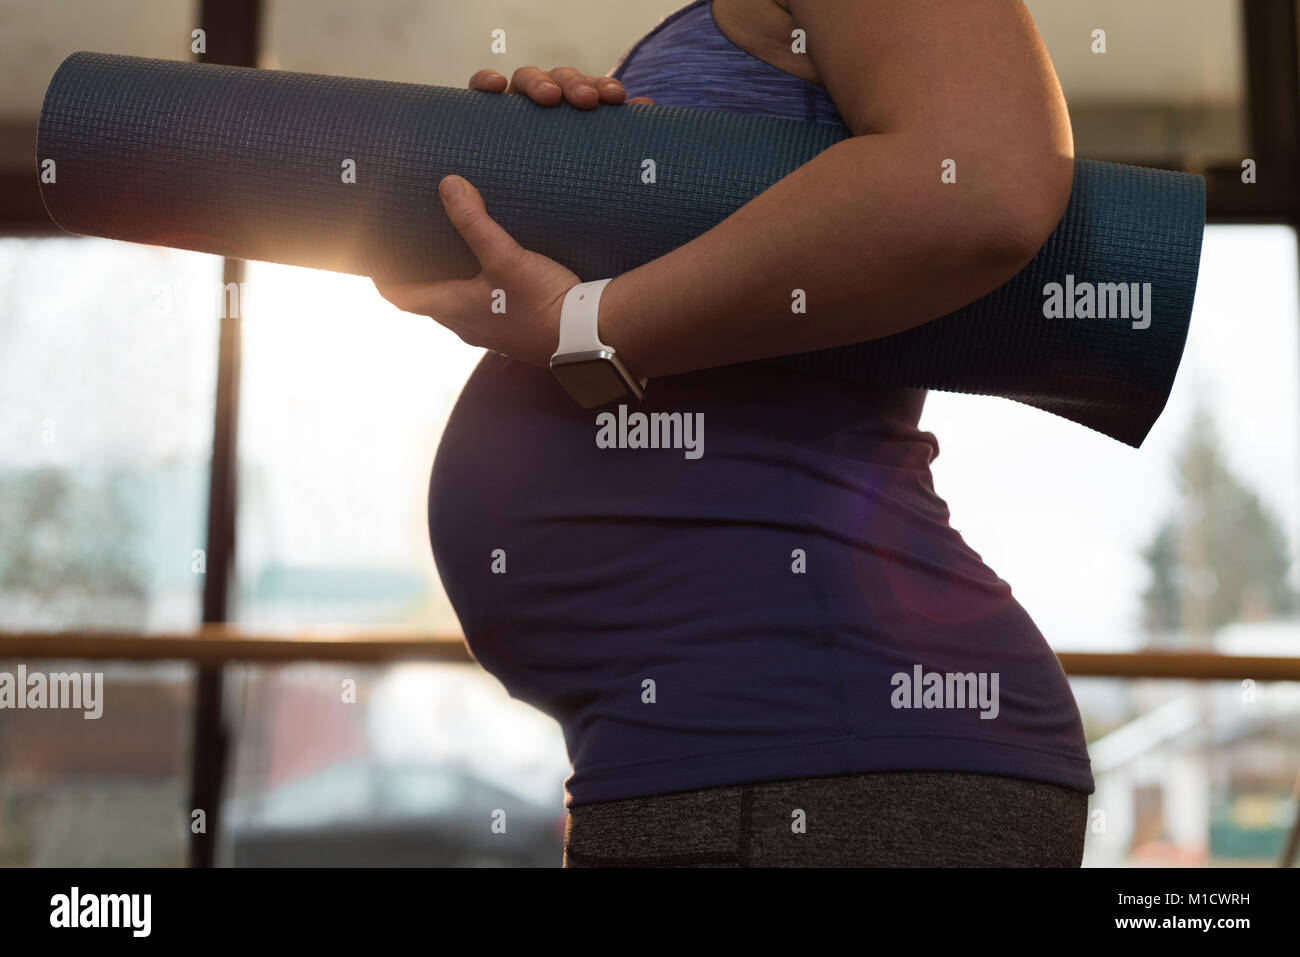 Pregnant woman holding exercise mat at home Stock Photo